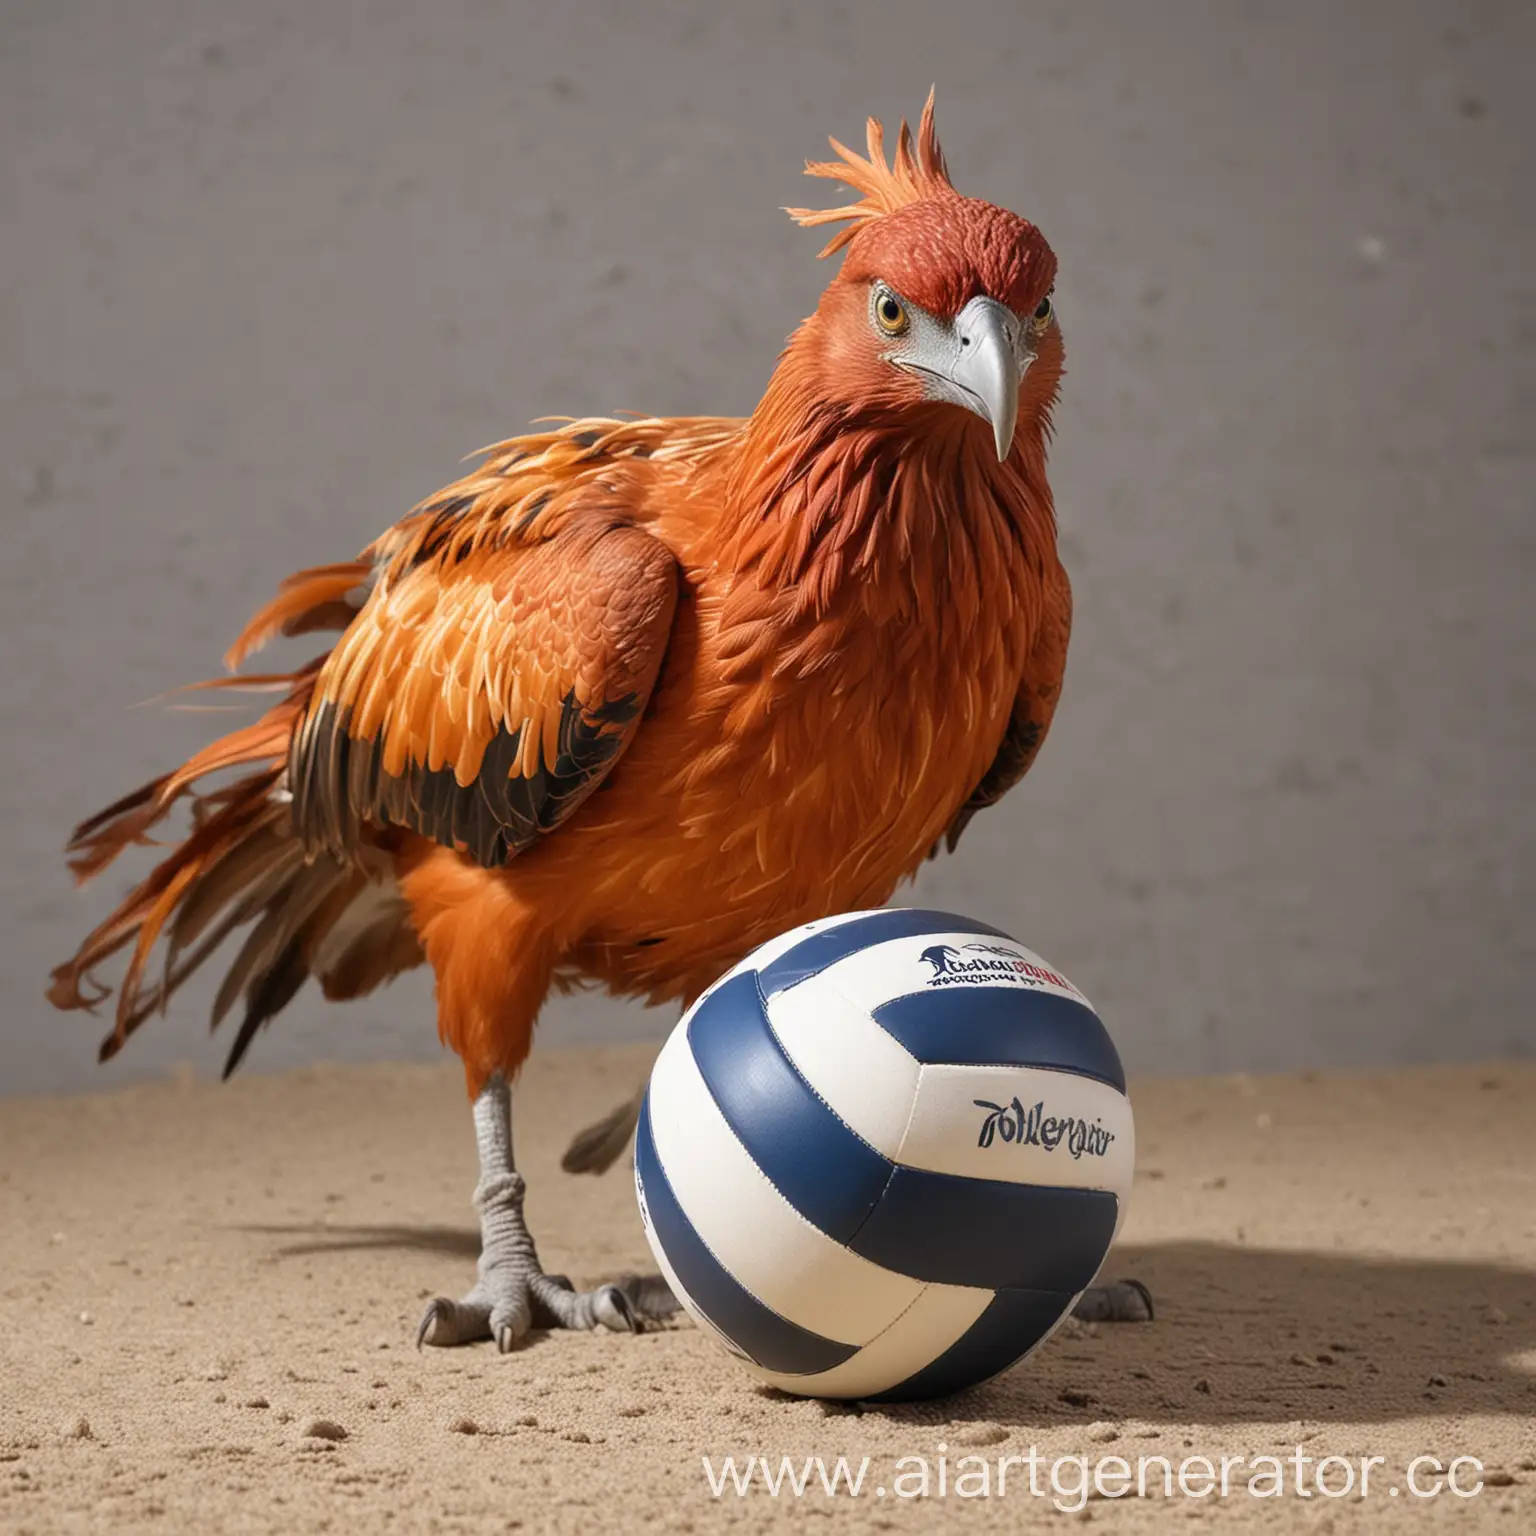 Majestic-Phoenix-Playing-Volleyball-Mythical-Bird-Engages-in-Dynamic-Sports-Activity